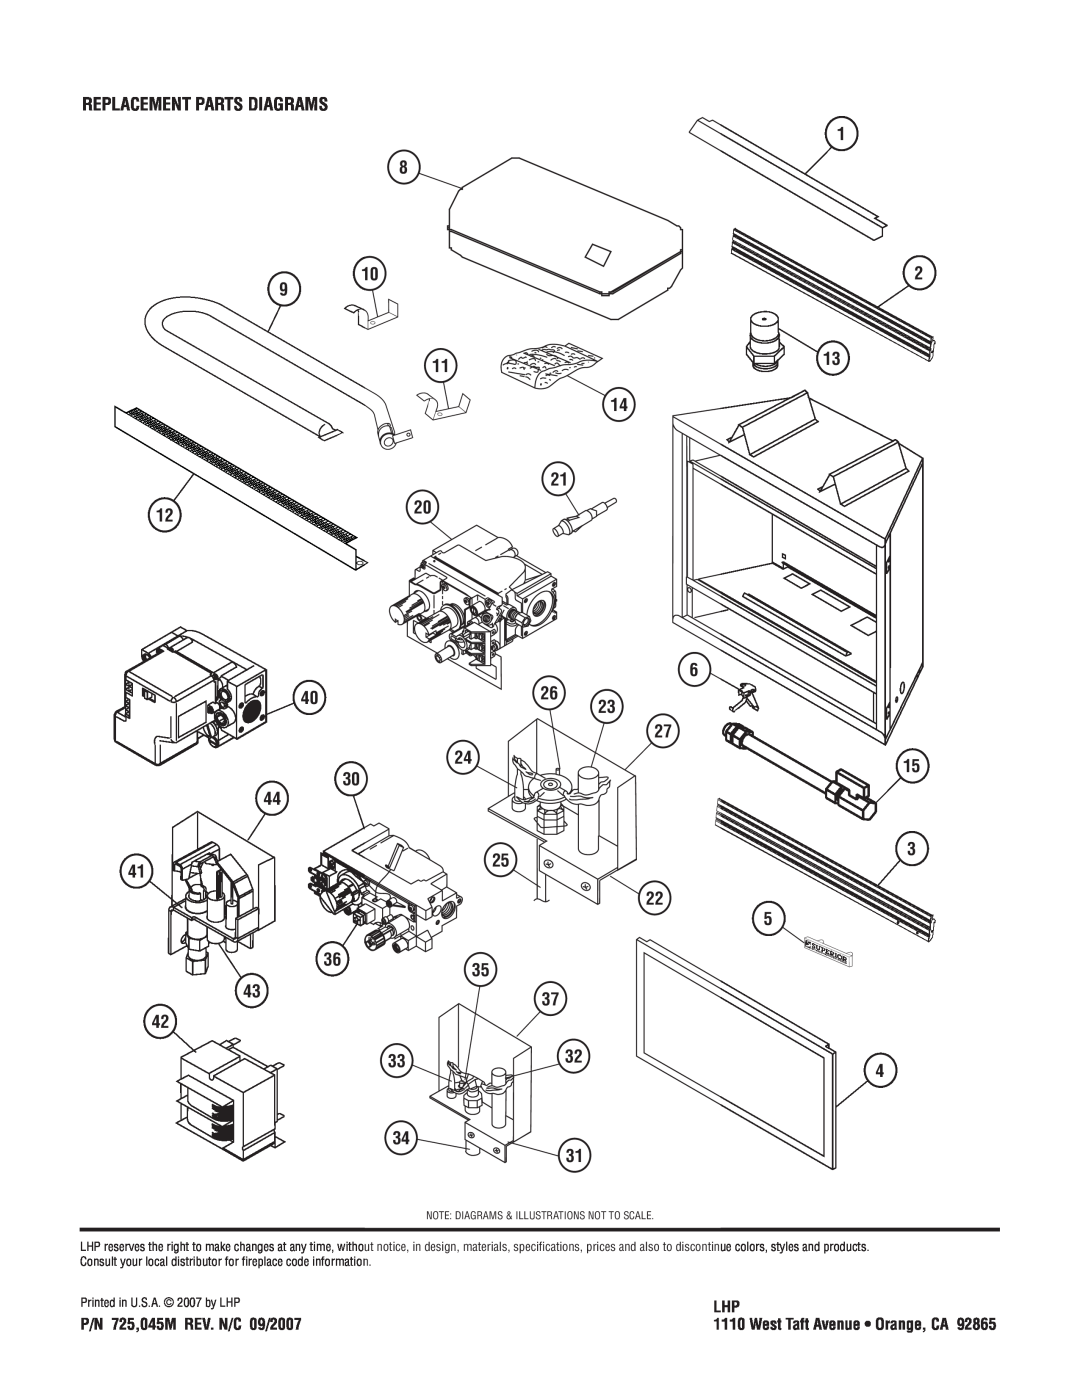 Superior SSDVT-3328CNM manual Replacement Parts Diagrams 